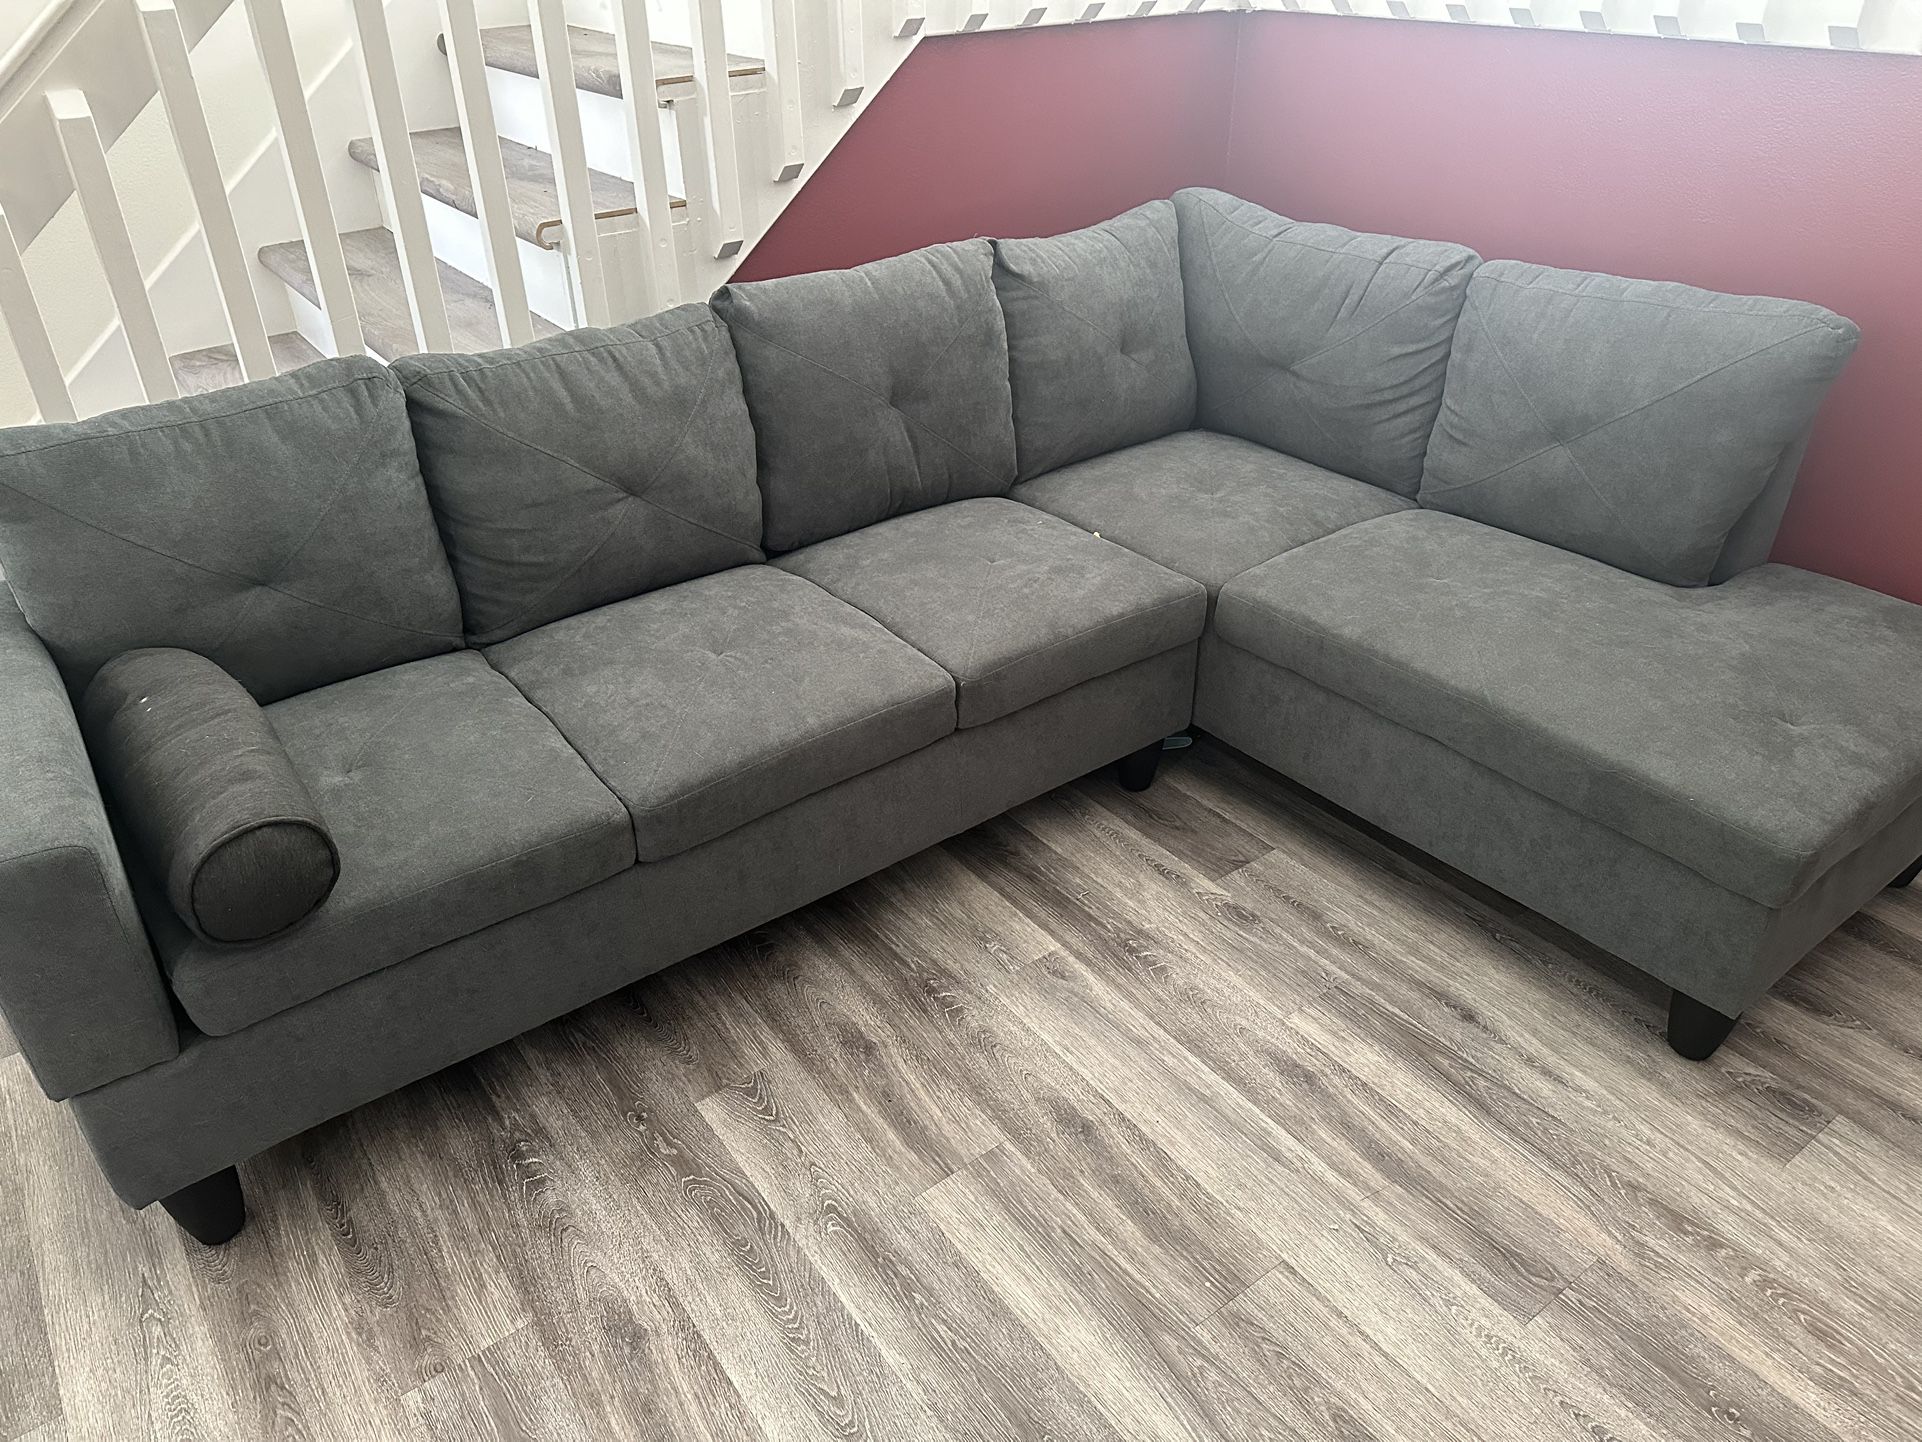 2 Piece Sectional by Ebern Designs